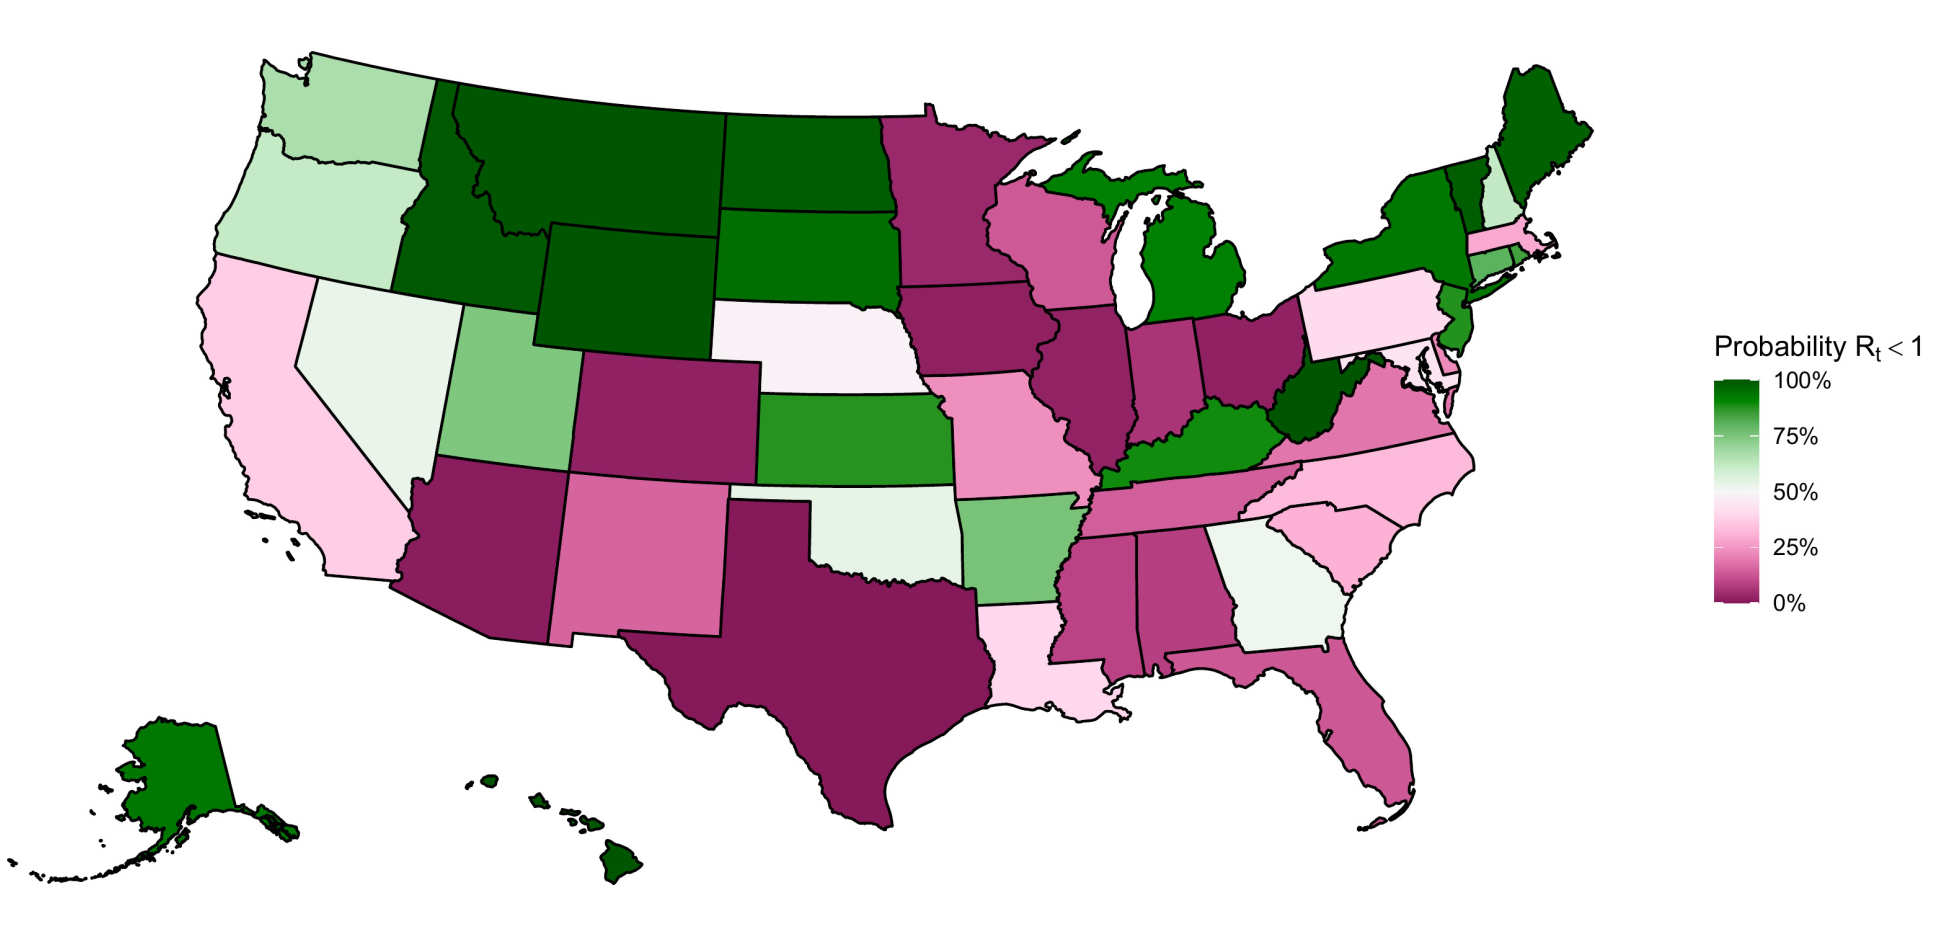 US infection map:  Green states are those with probability that Rt is below 1 is high, and pink states are those with low probability. The closer a value is to 100%, the more certain we are that the rate of transmission is below 1 and that new infections are not increasing at present. Estimation as of the 9th of May 2020.